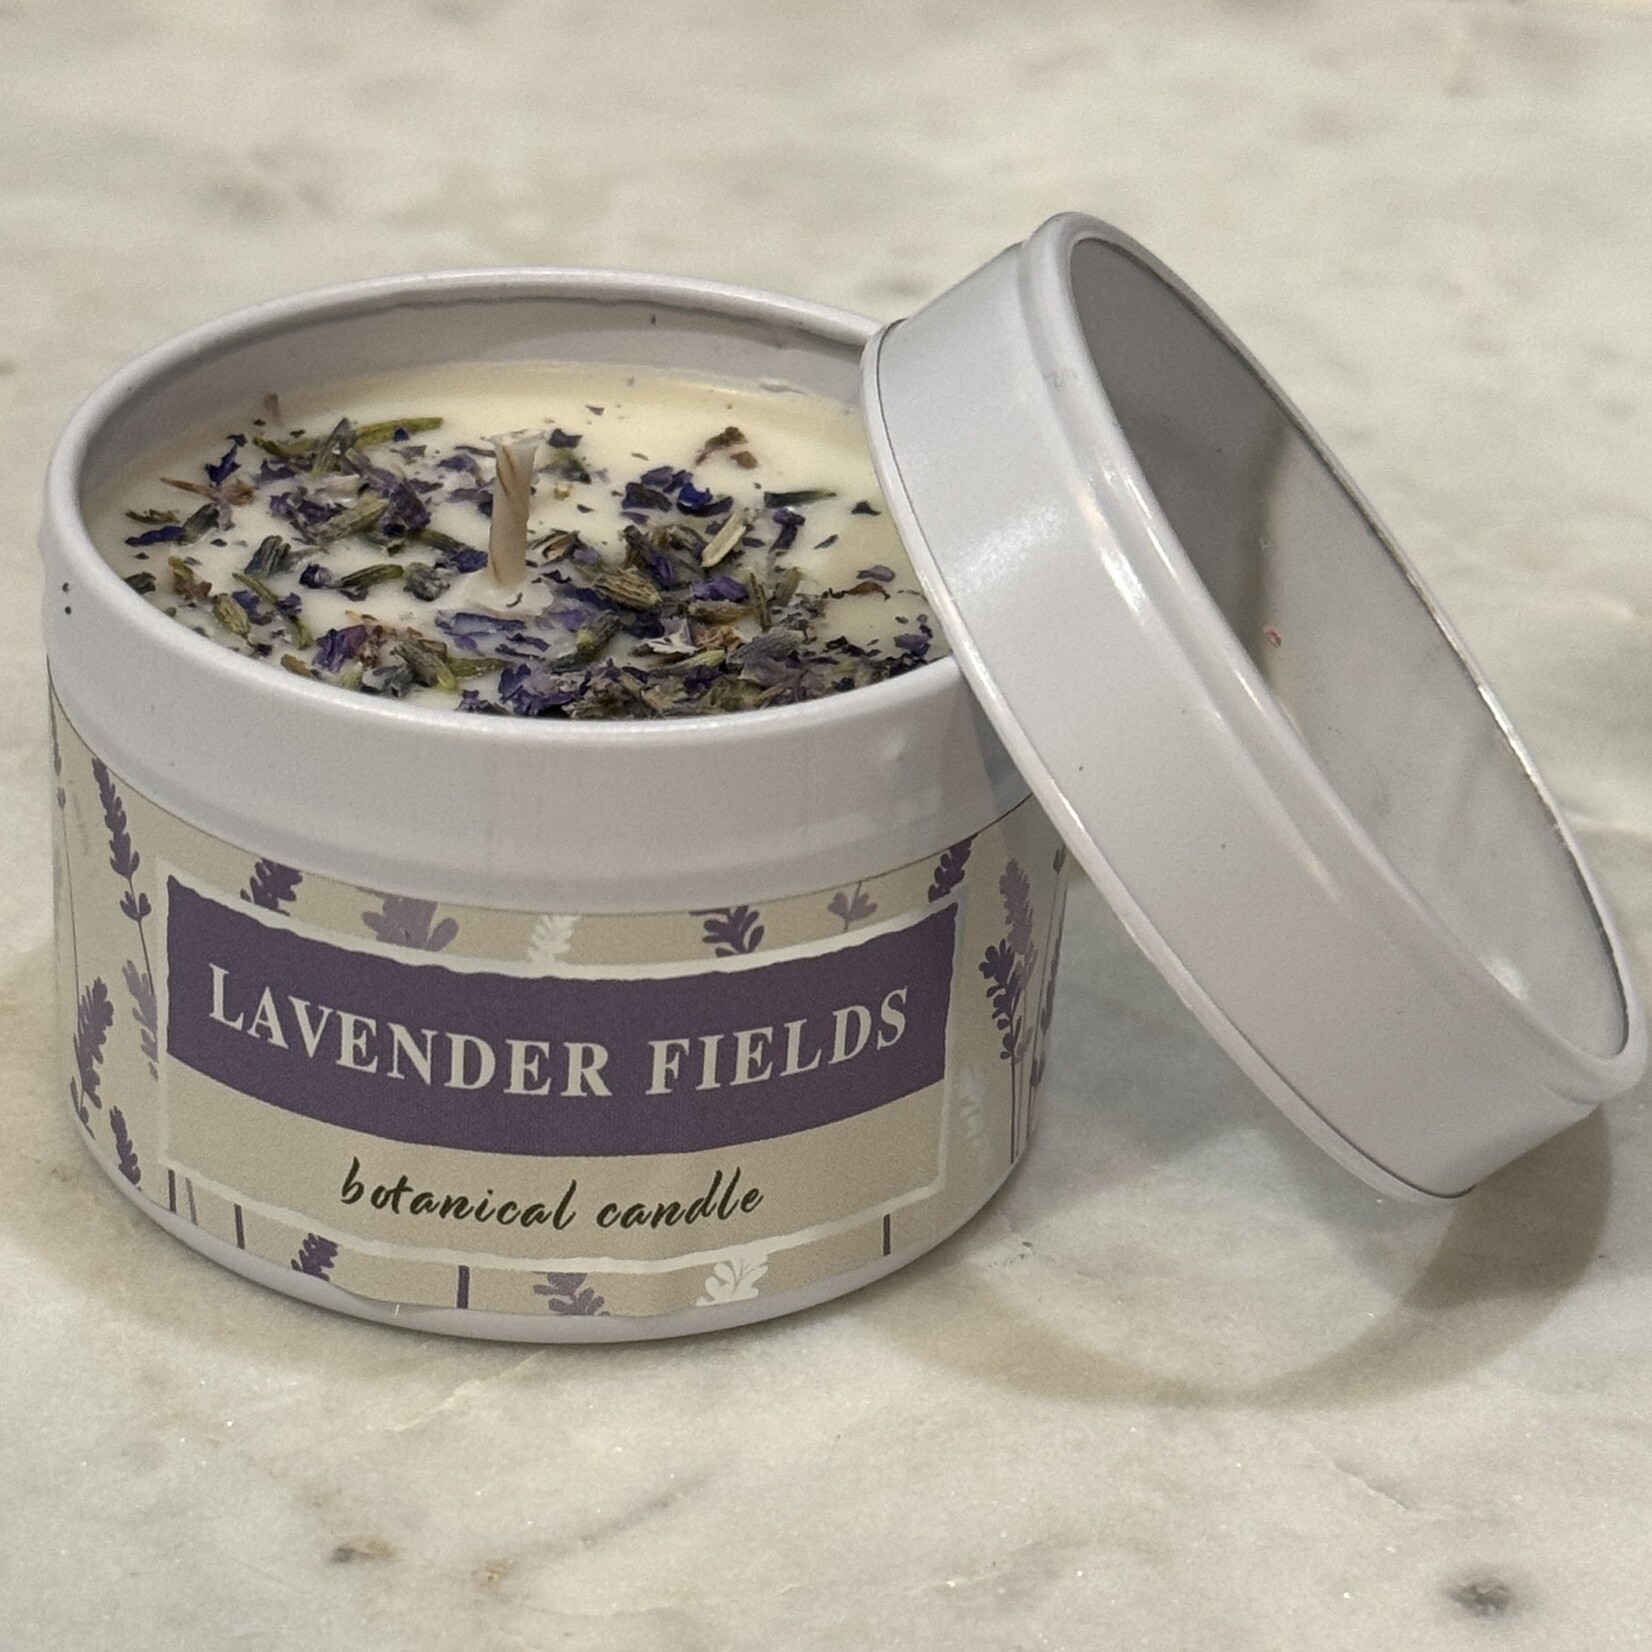 Wild Olive Wild Olive Lavender Fields Sprinkle Tin Candle